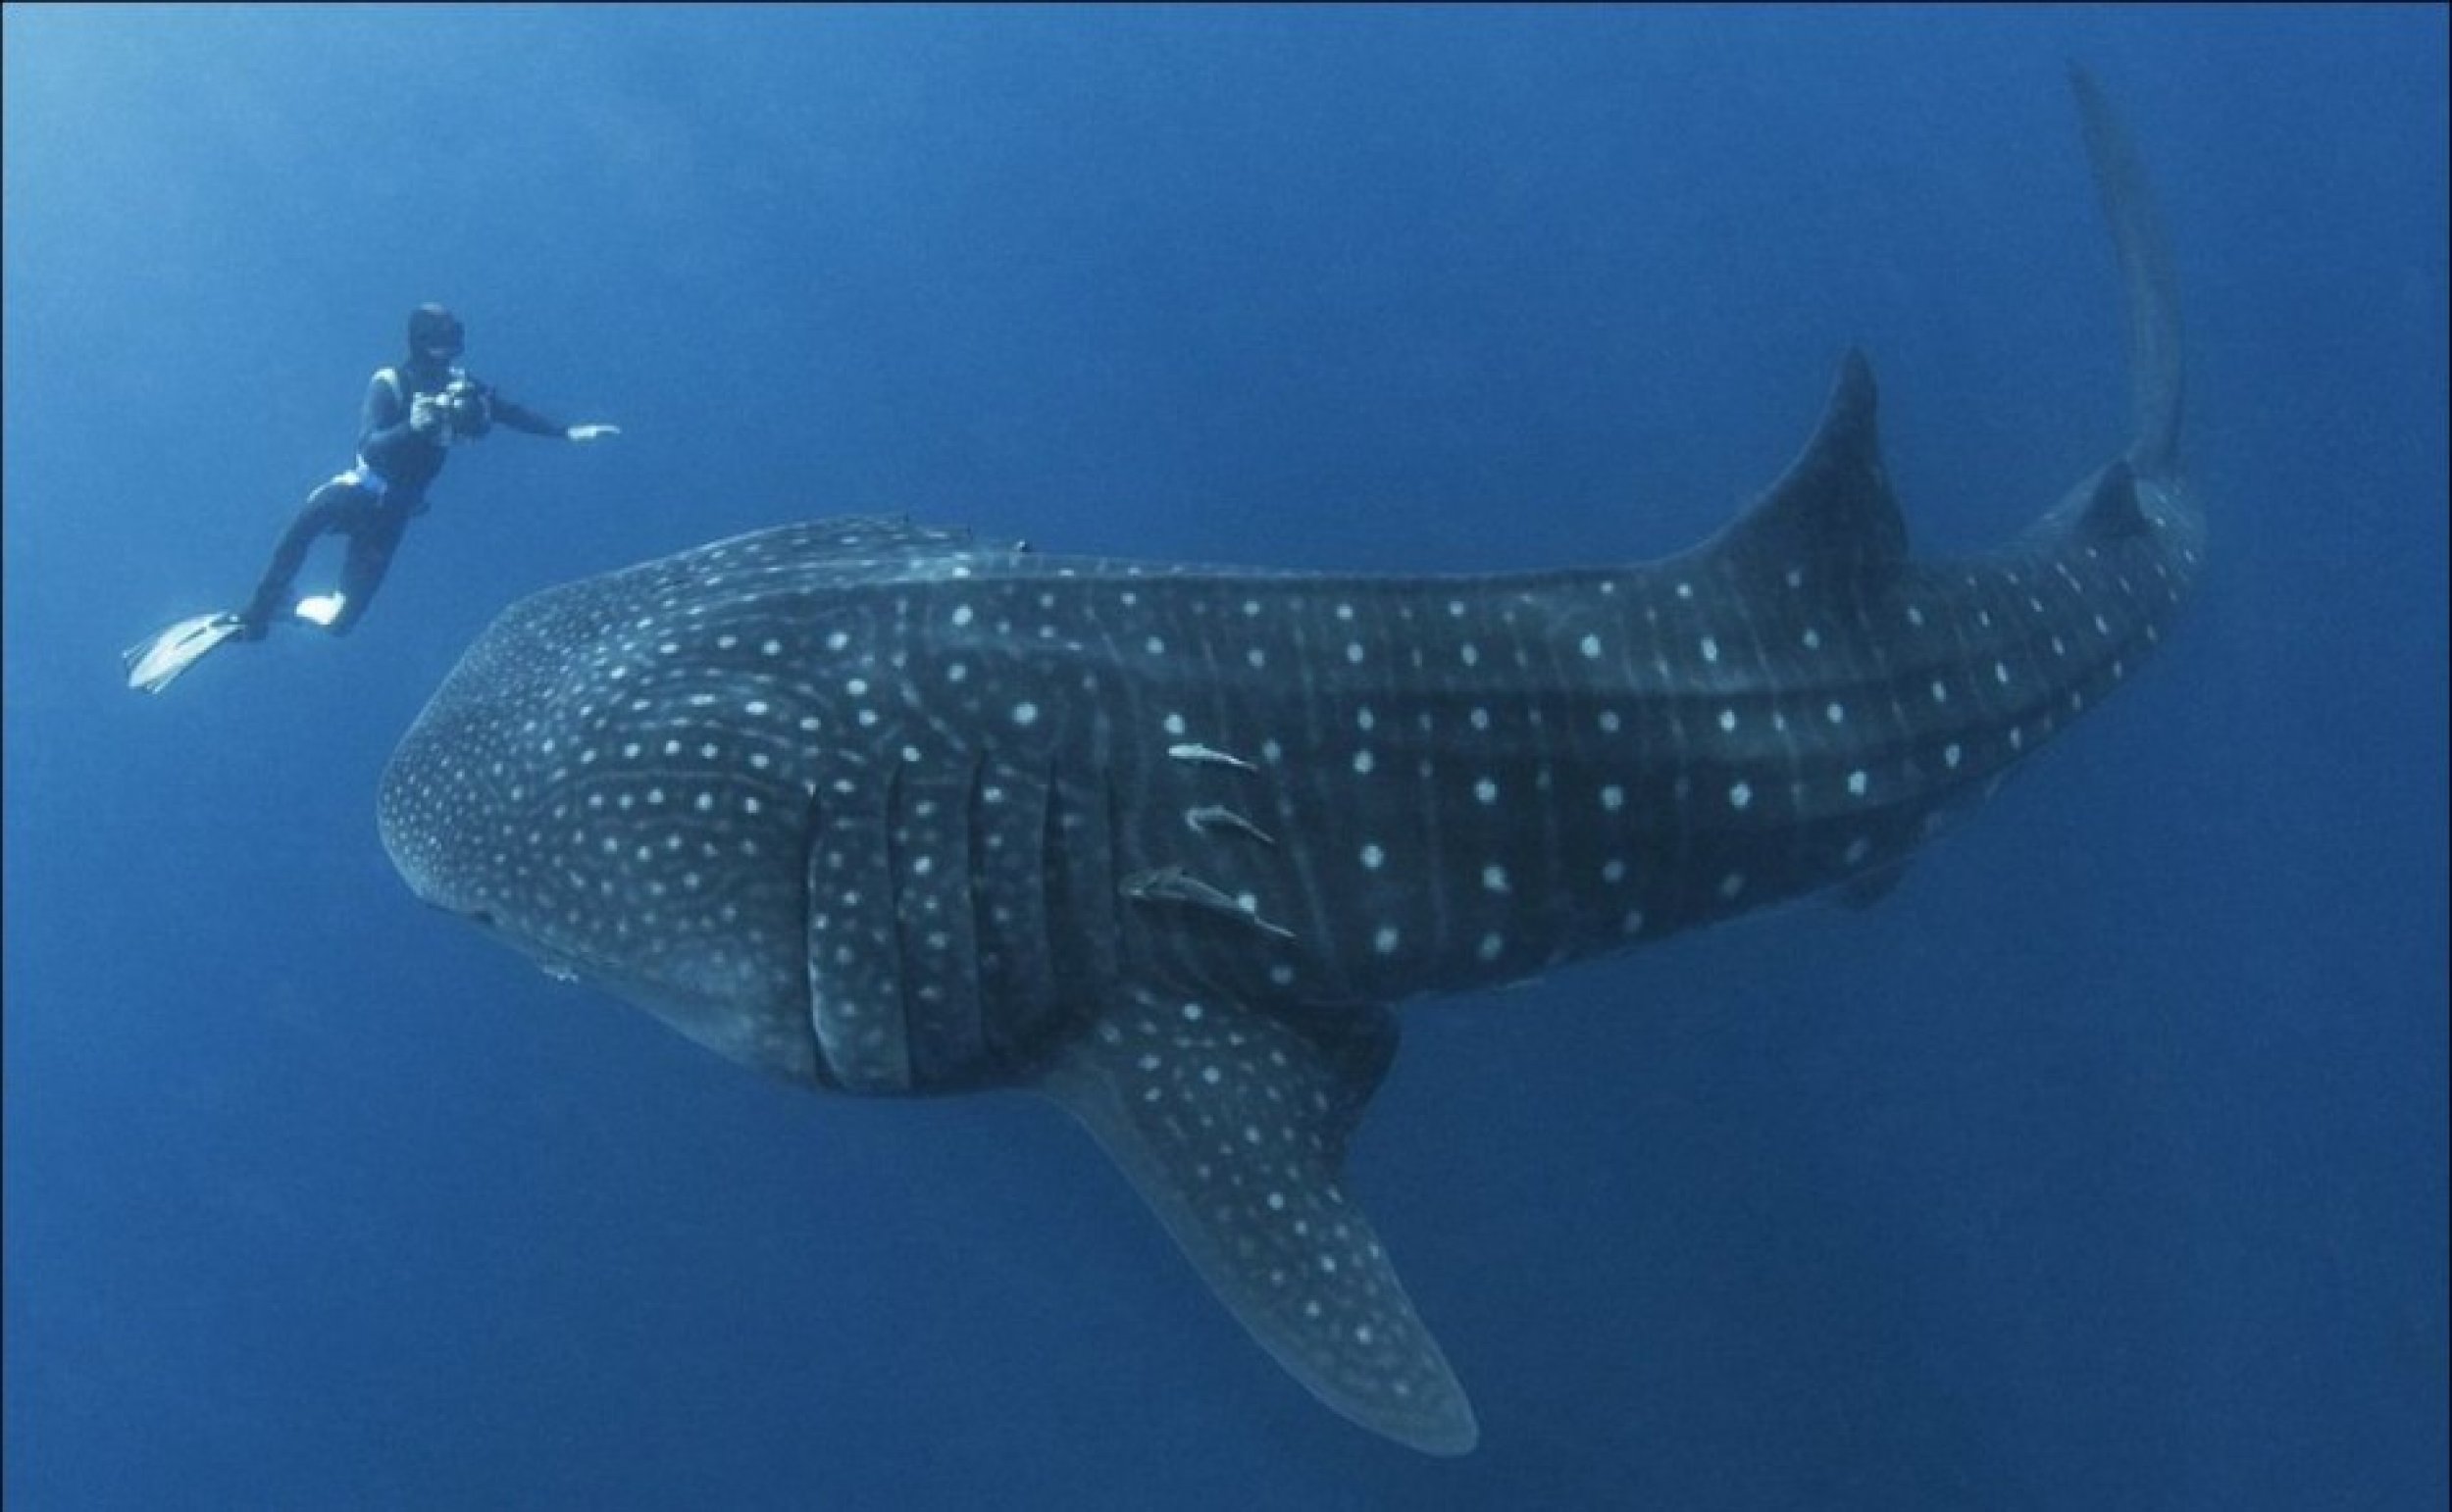 Most Spectacular Photos of Worlds Largest Fish Whale Sharks Almost Swallowing Diver